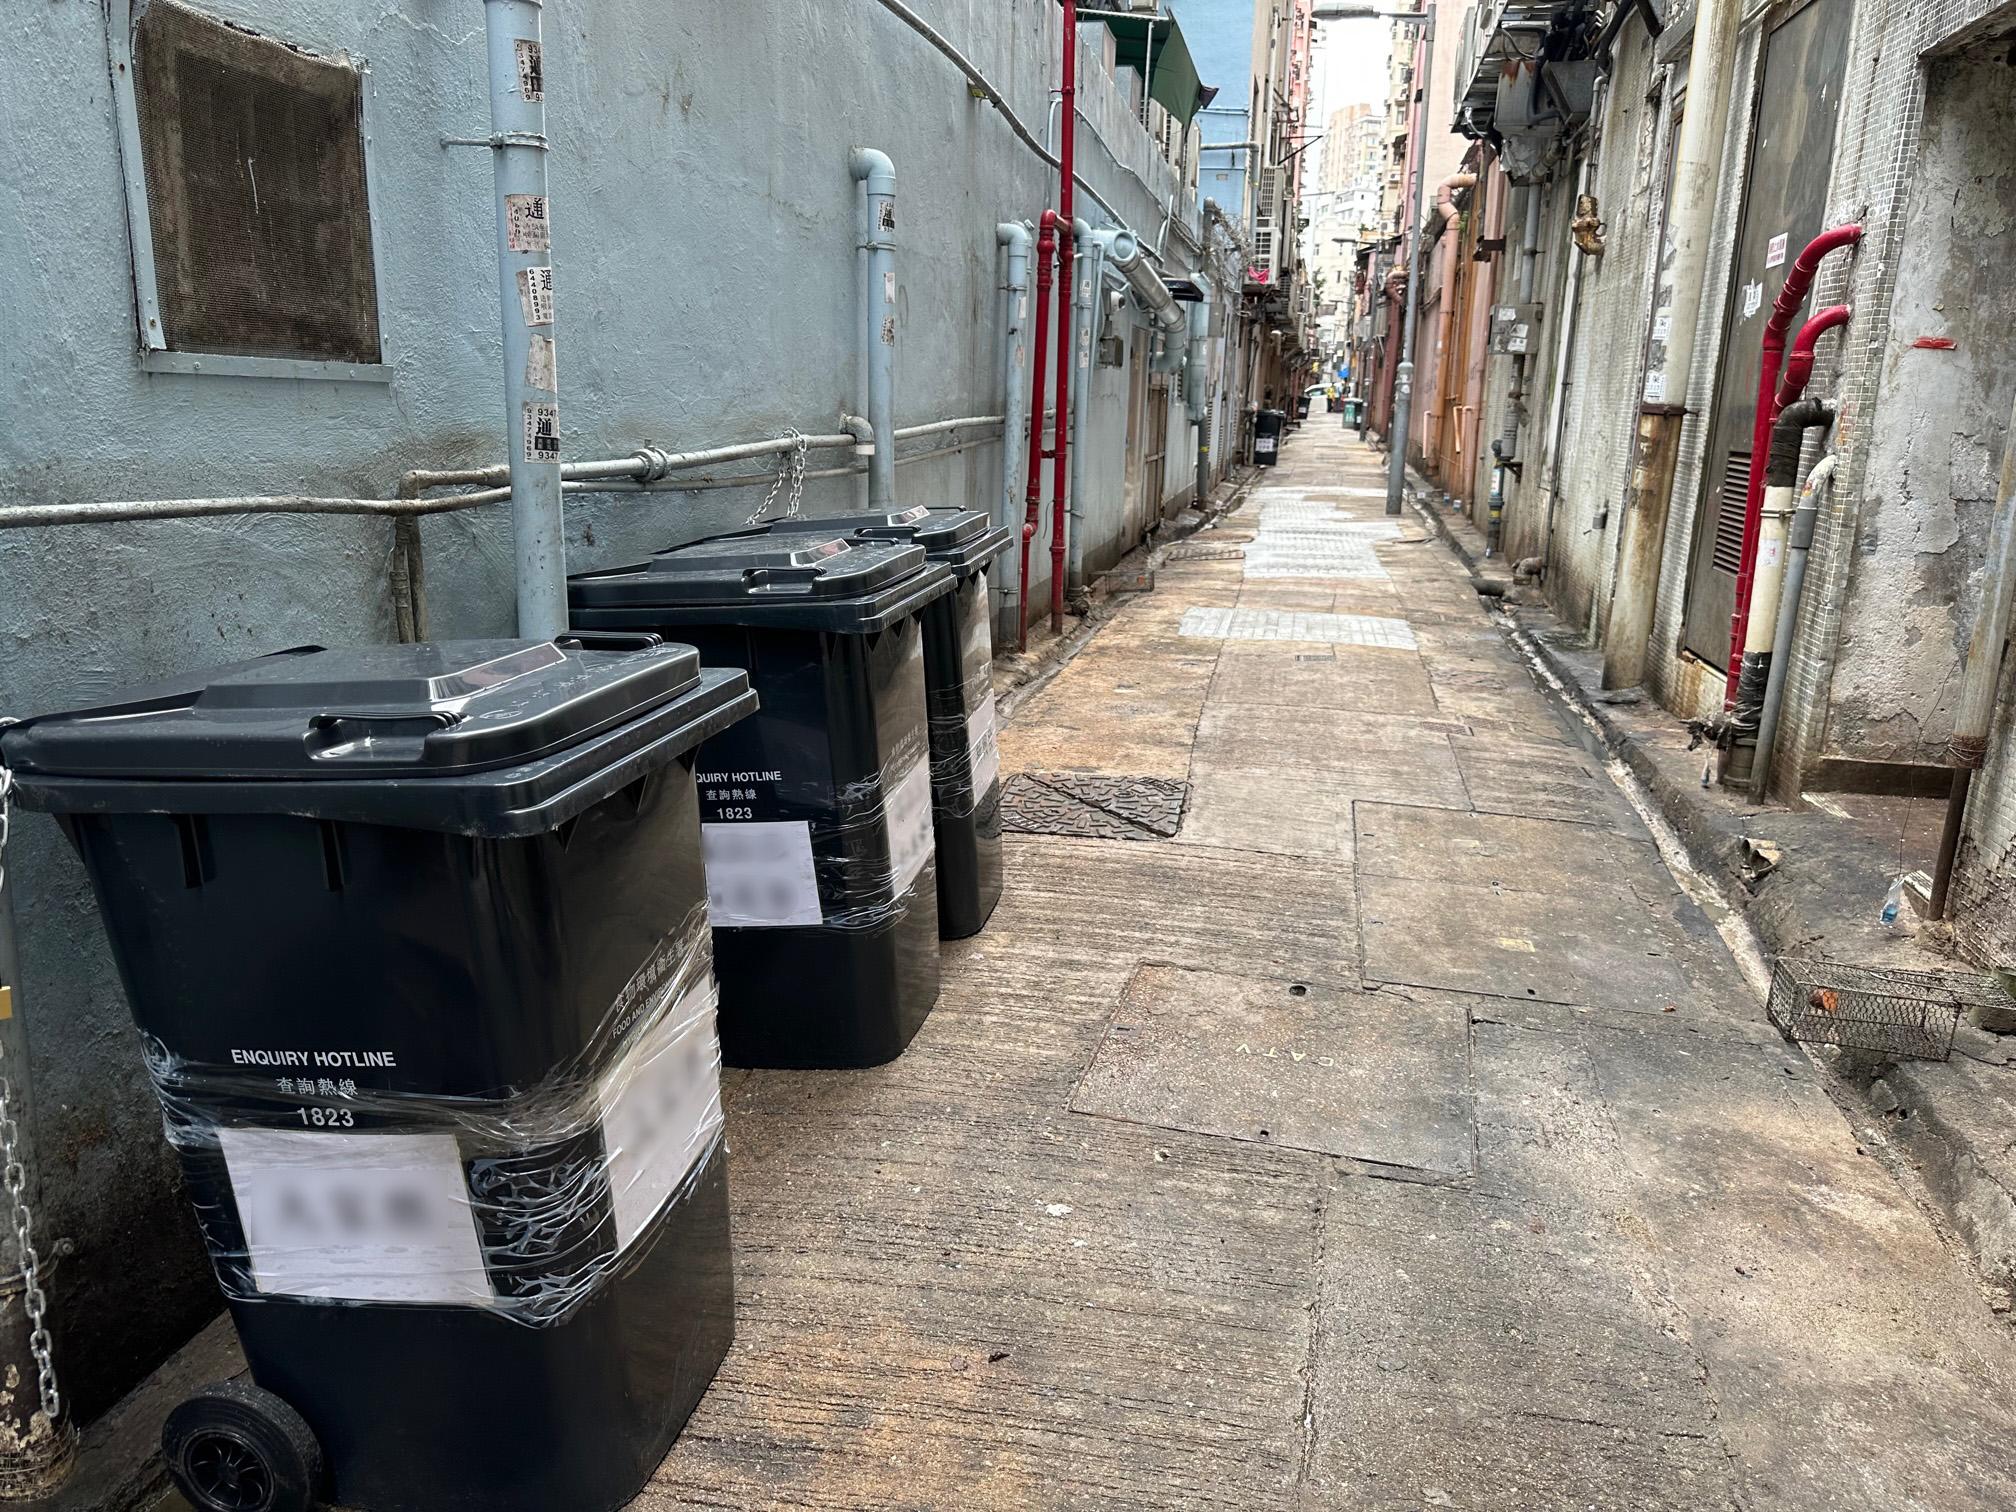 The Food and Environmental Hygiene Department today (November 7) begins a trial scheme in various districts to allow licensed food premises to place large-size waste containers in their connected rear lanes under specific conditions, for temporary storage of waste until collection by the cleaning workers hired by the food premises. Photo shows large size waste containers in a rear lane in Kowloon City District.
